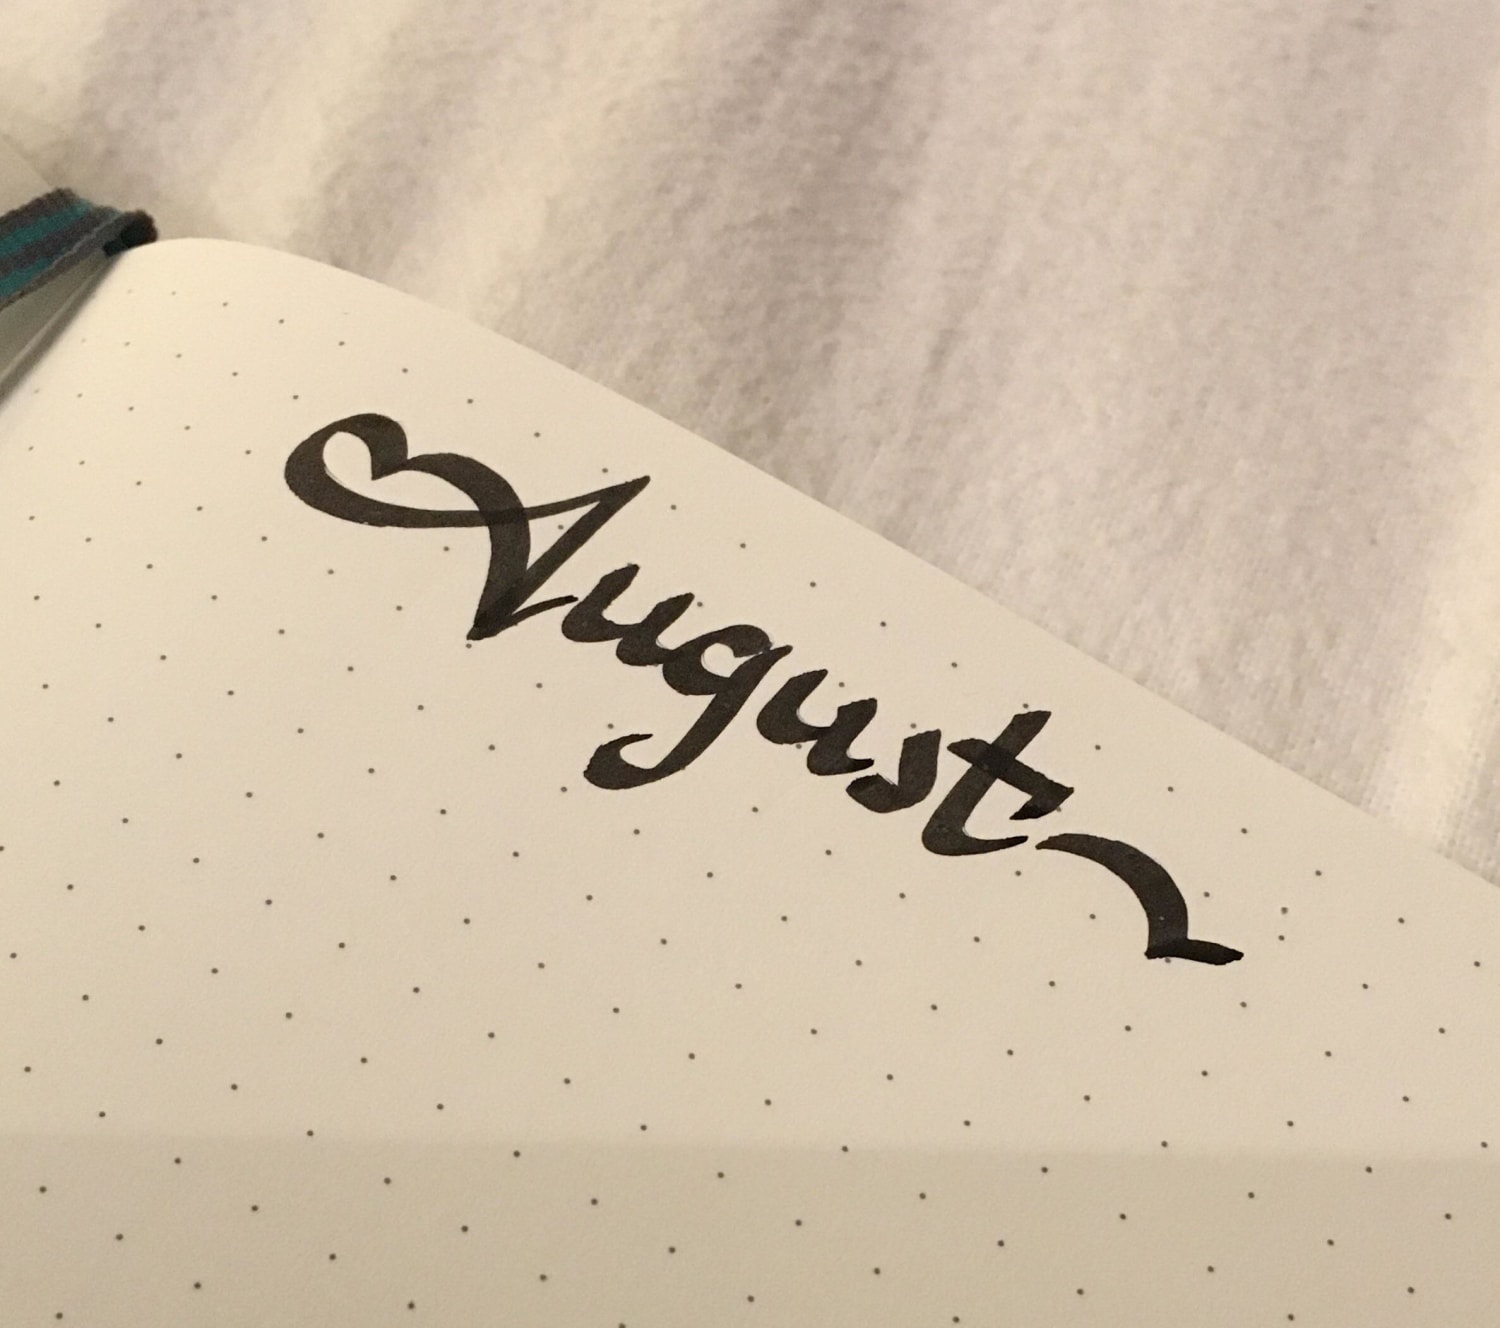 I wrote the Word August at 5am